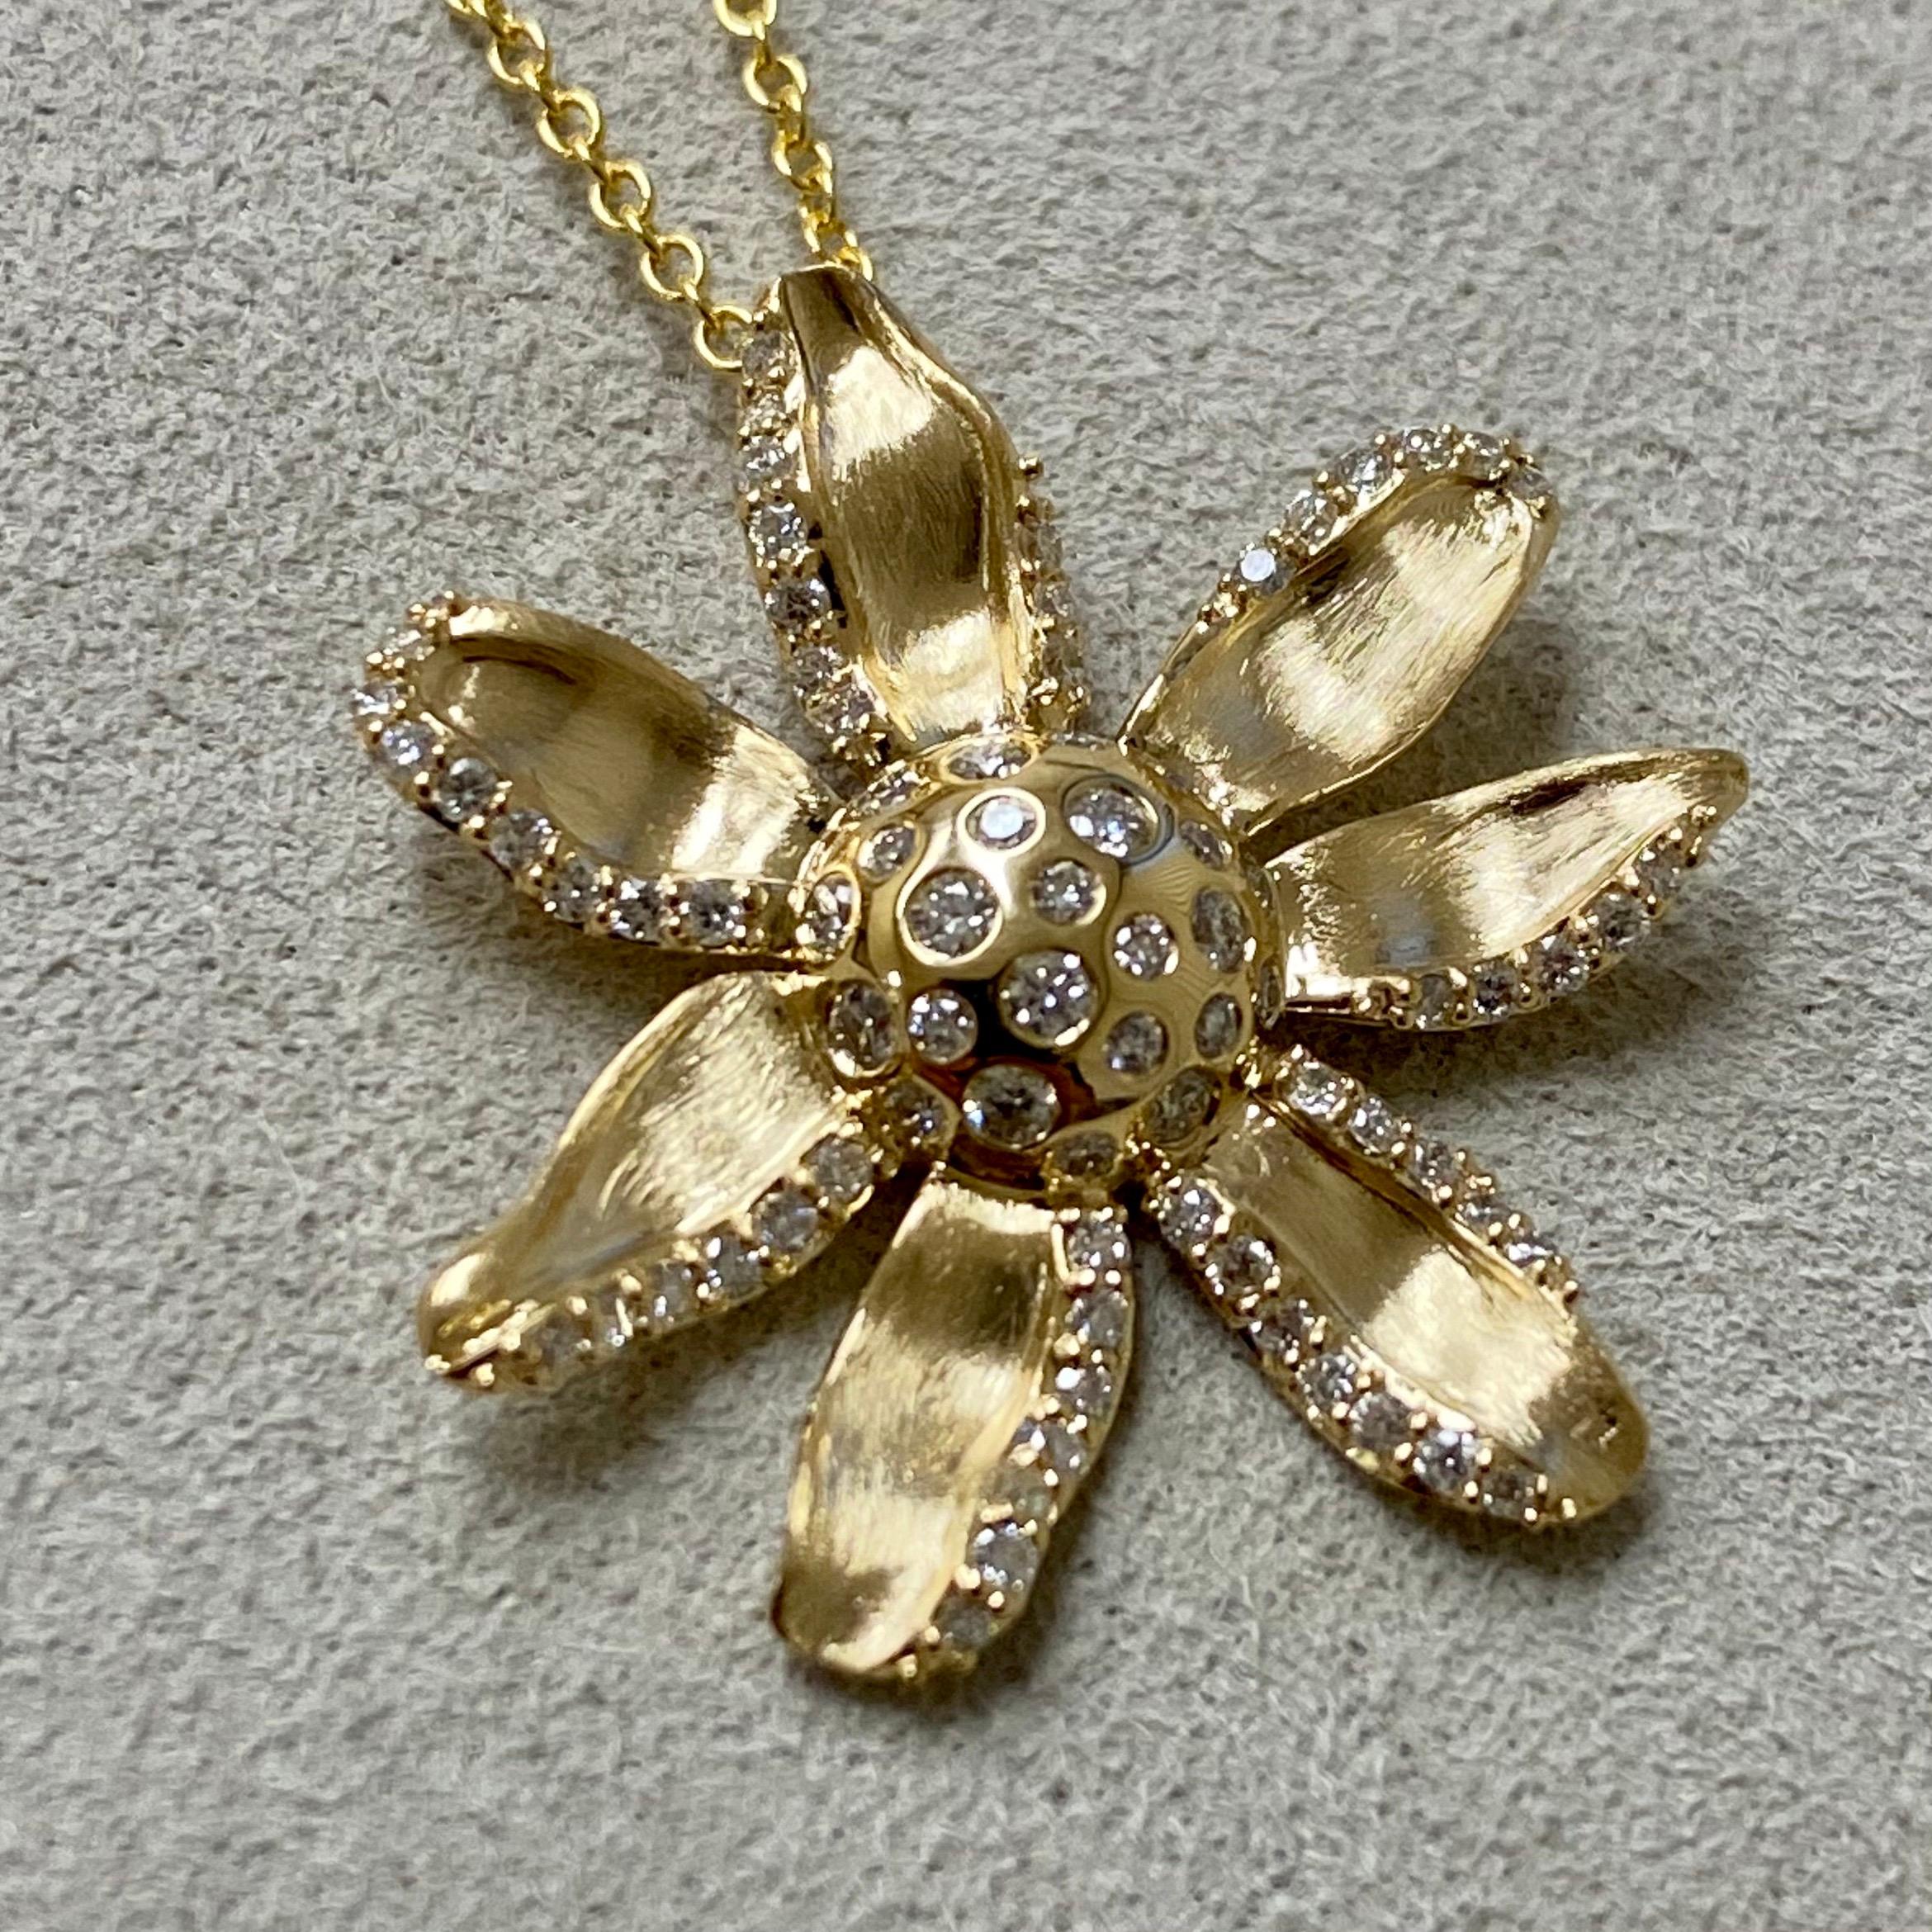 Created in 18kyg
Satin finish Jardin flower pendant
Diamonds 0.40 carats approx.
18 inch necklace, can be worn at 16th and 17th inch

Fashioned in 18 karat gold, this necklace presents a satin-finished Jardin flower pendant, adorned with 0.40 carats